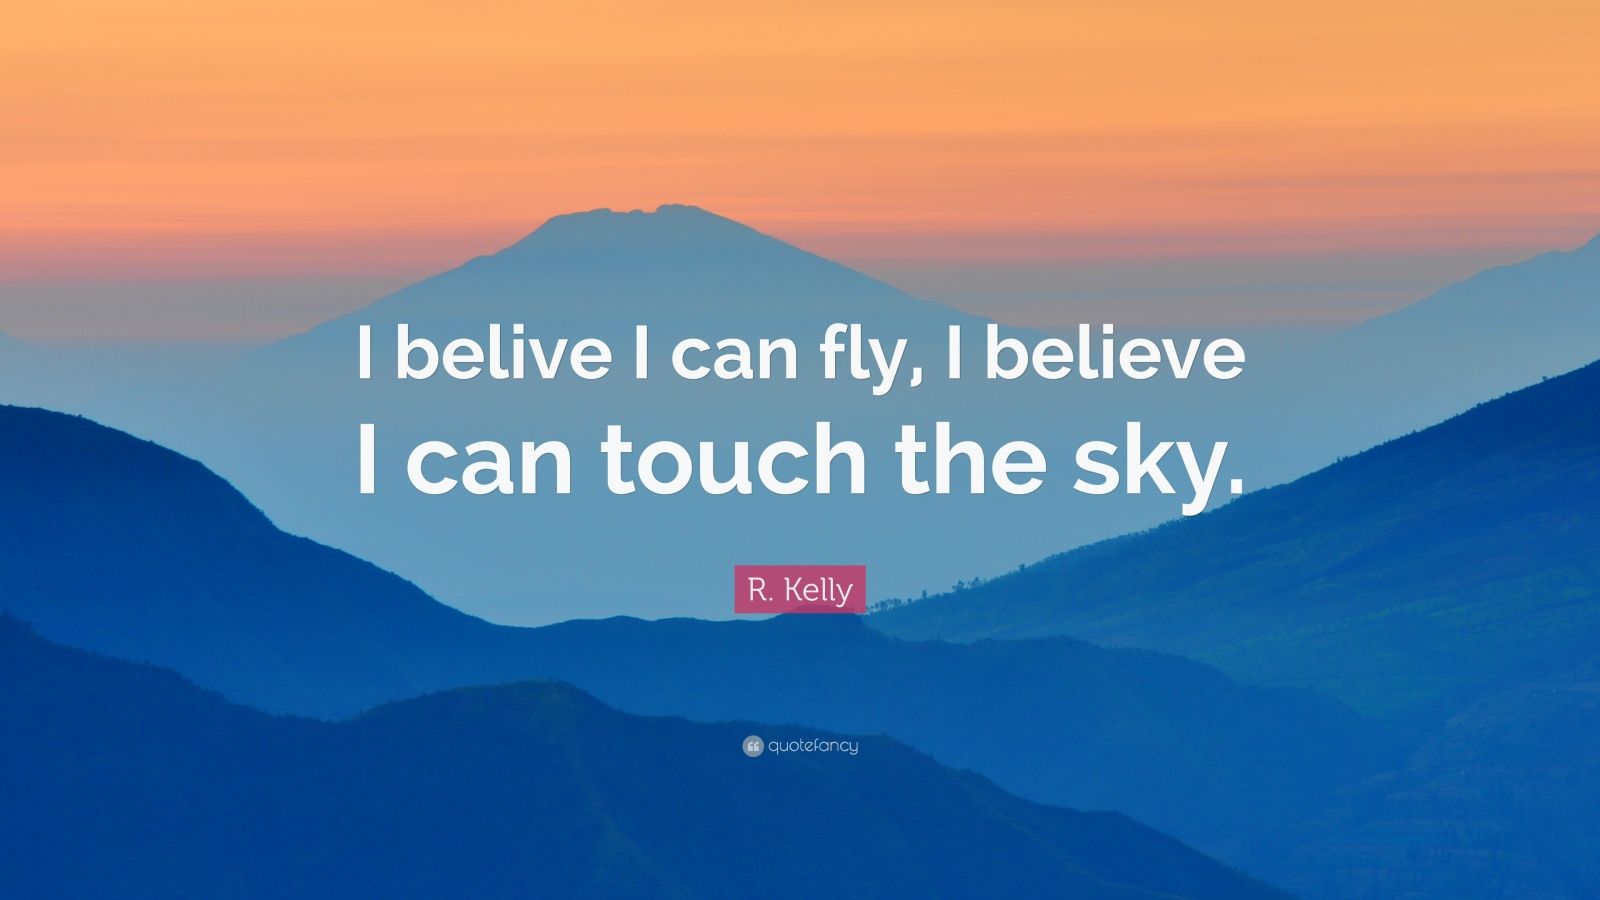 R. Kelly Quote: “I belive I can fly, I believe I can touch the sky